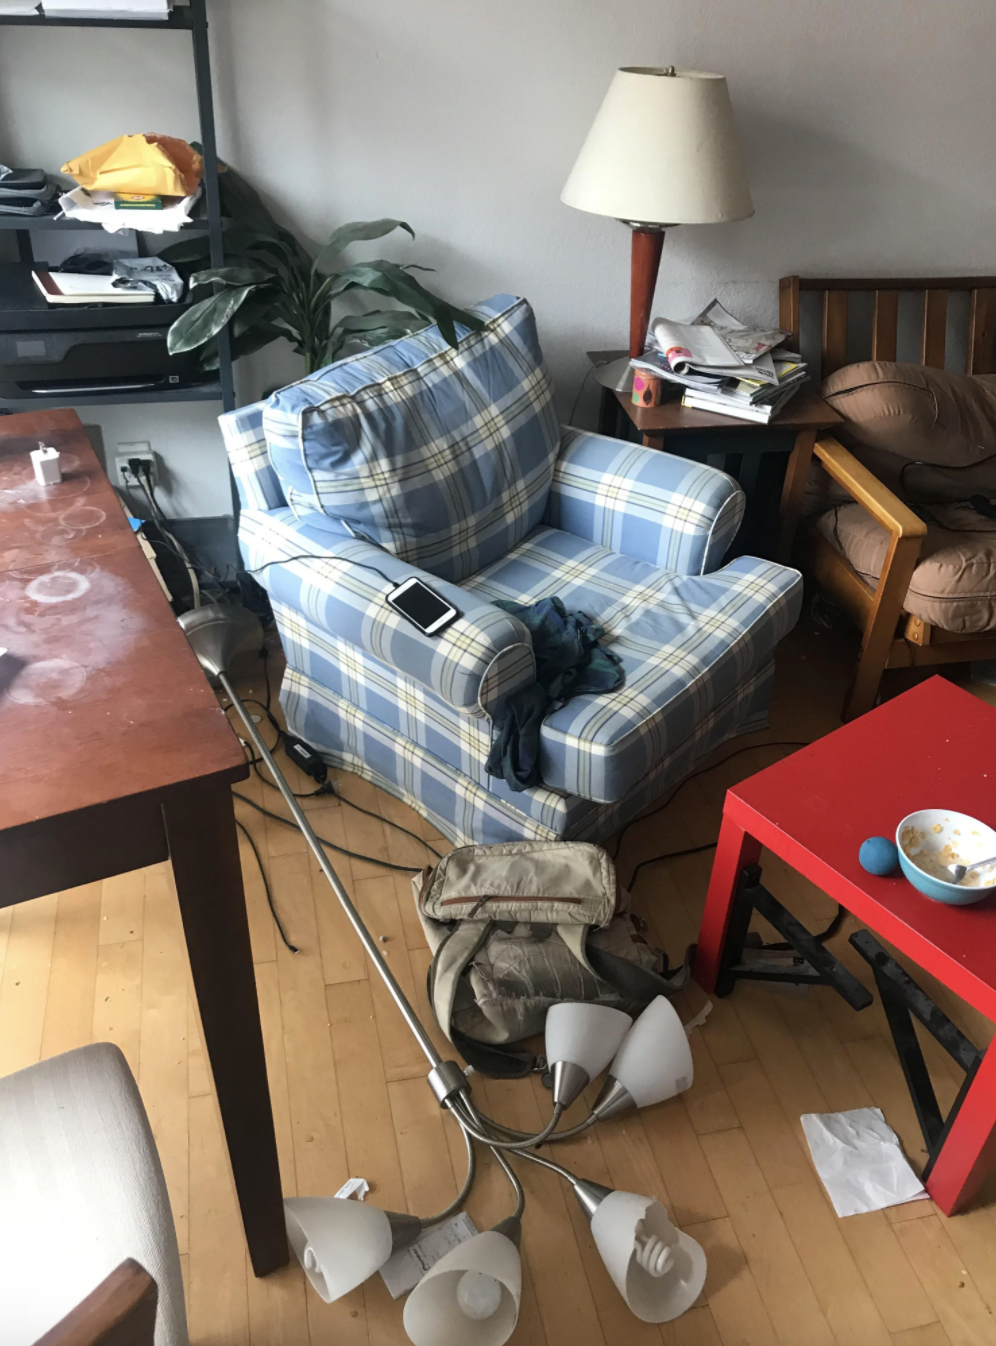 Messy/dirty living room with a broken lamp, dirty kitchen table